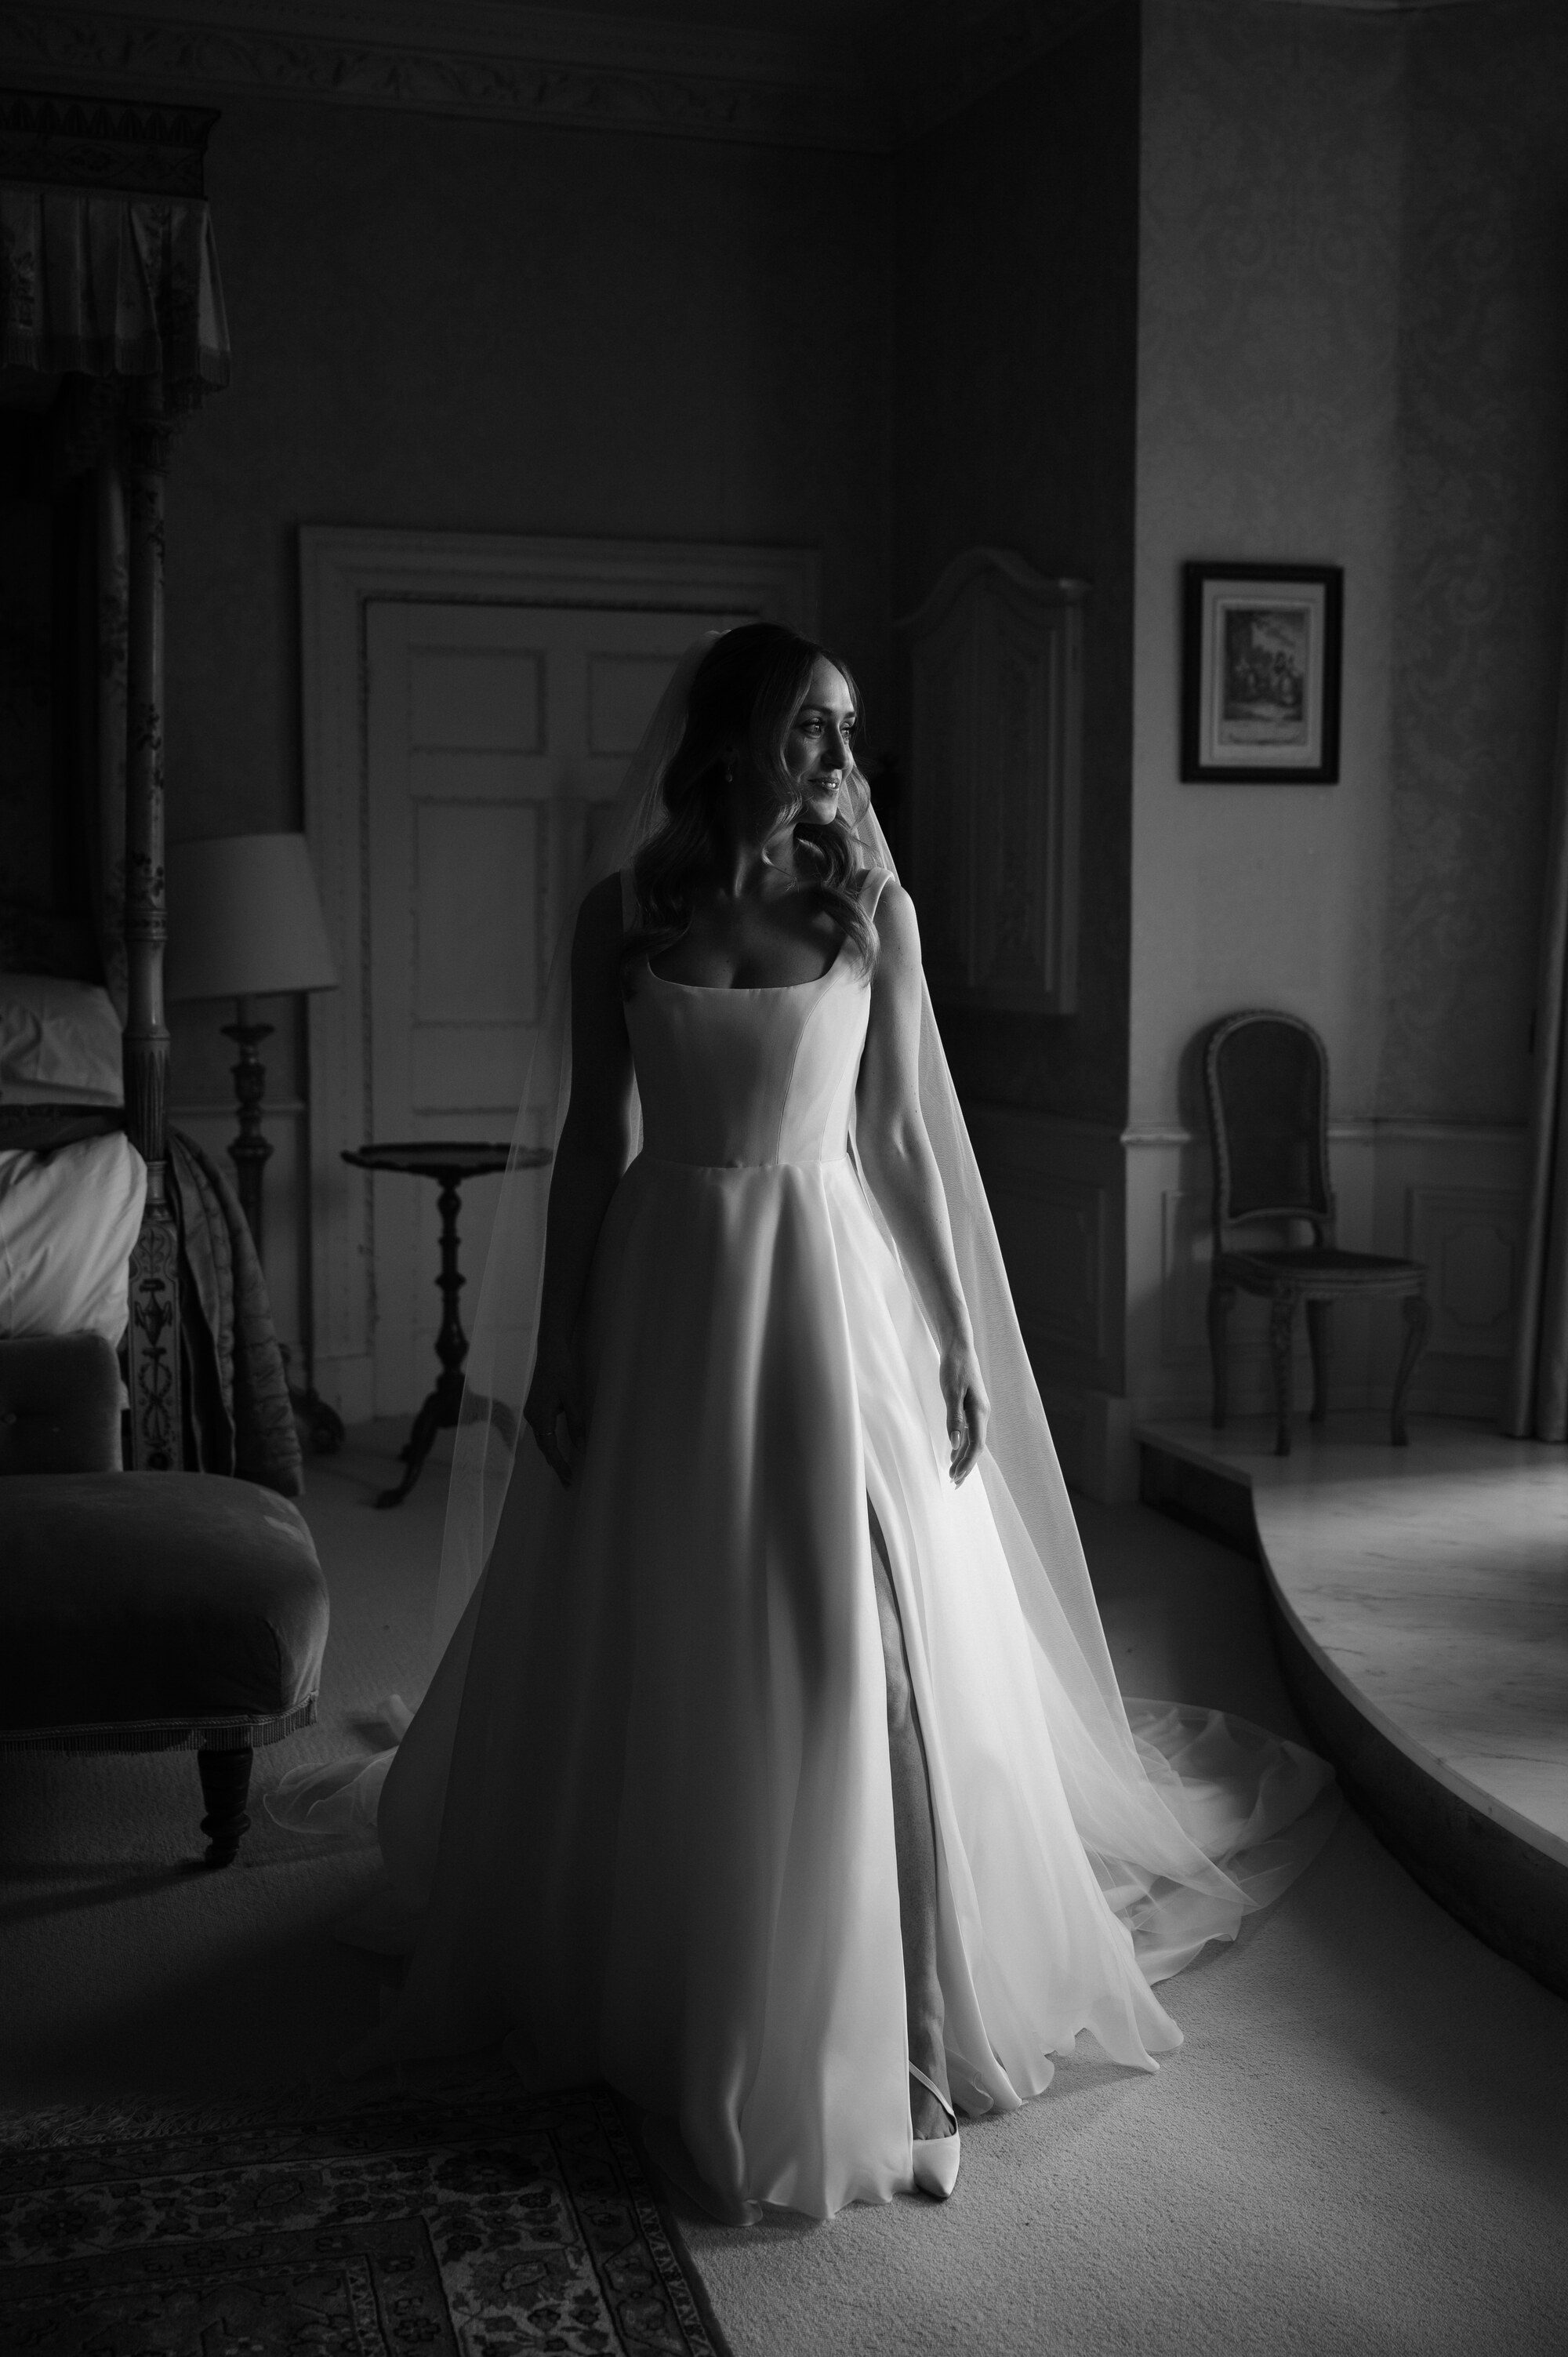 https://www.suzanneneville.com/site/assets/files/3653/taylor-hughes_photography_-_hannah_tom-[00-99].jpg